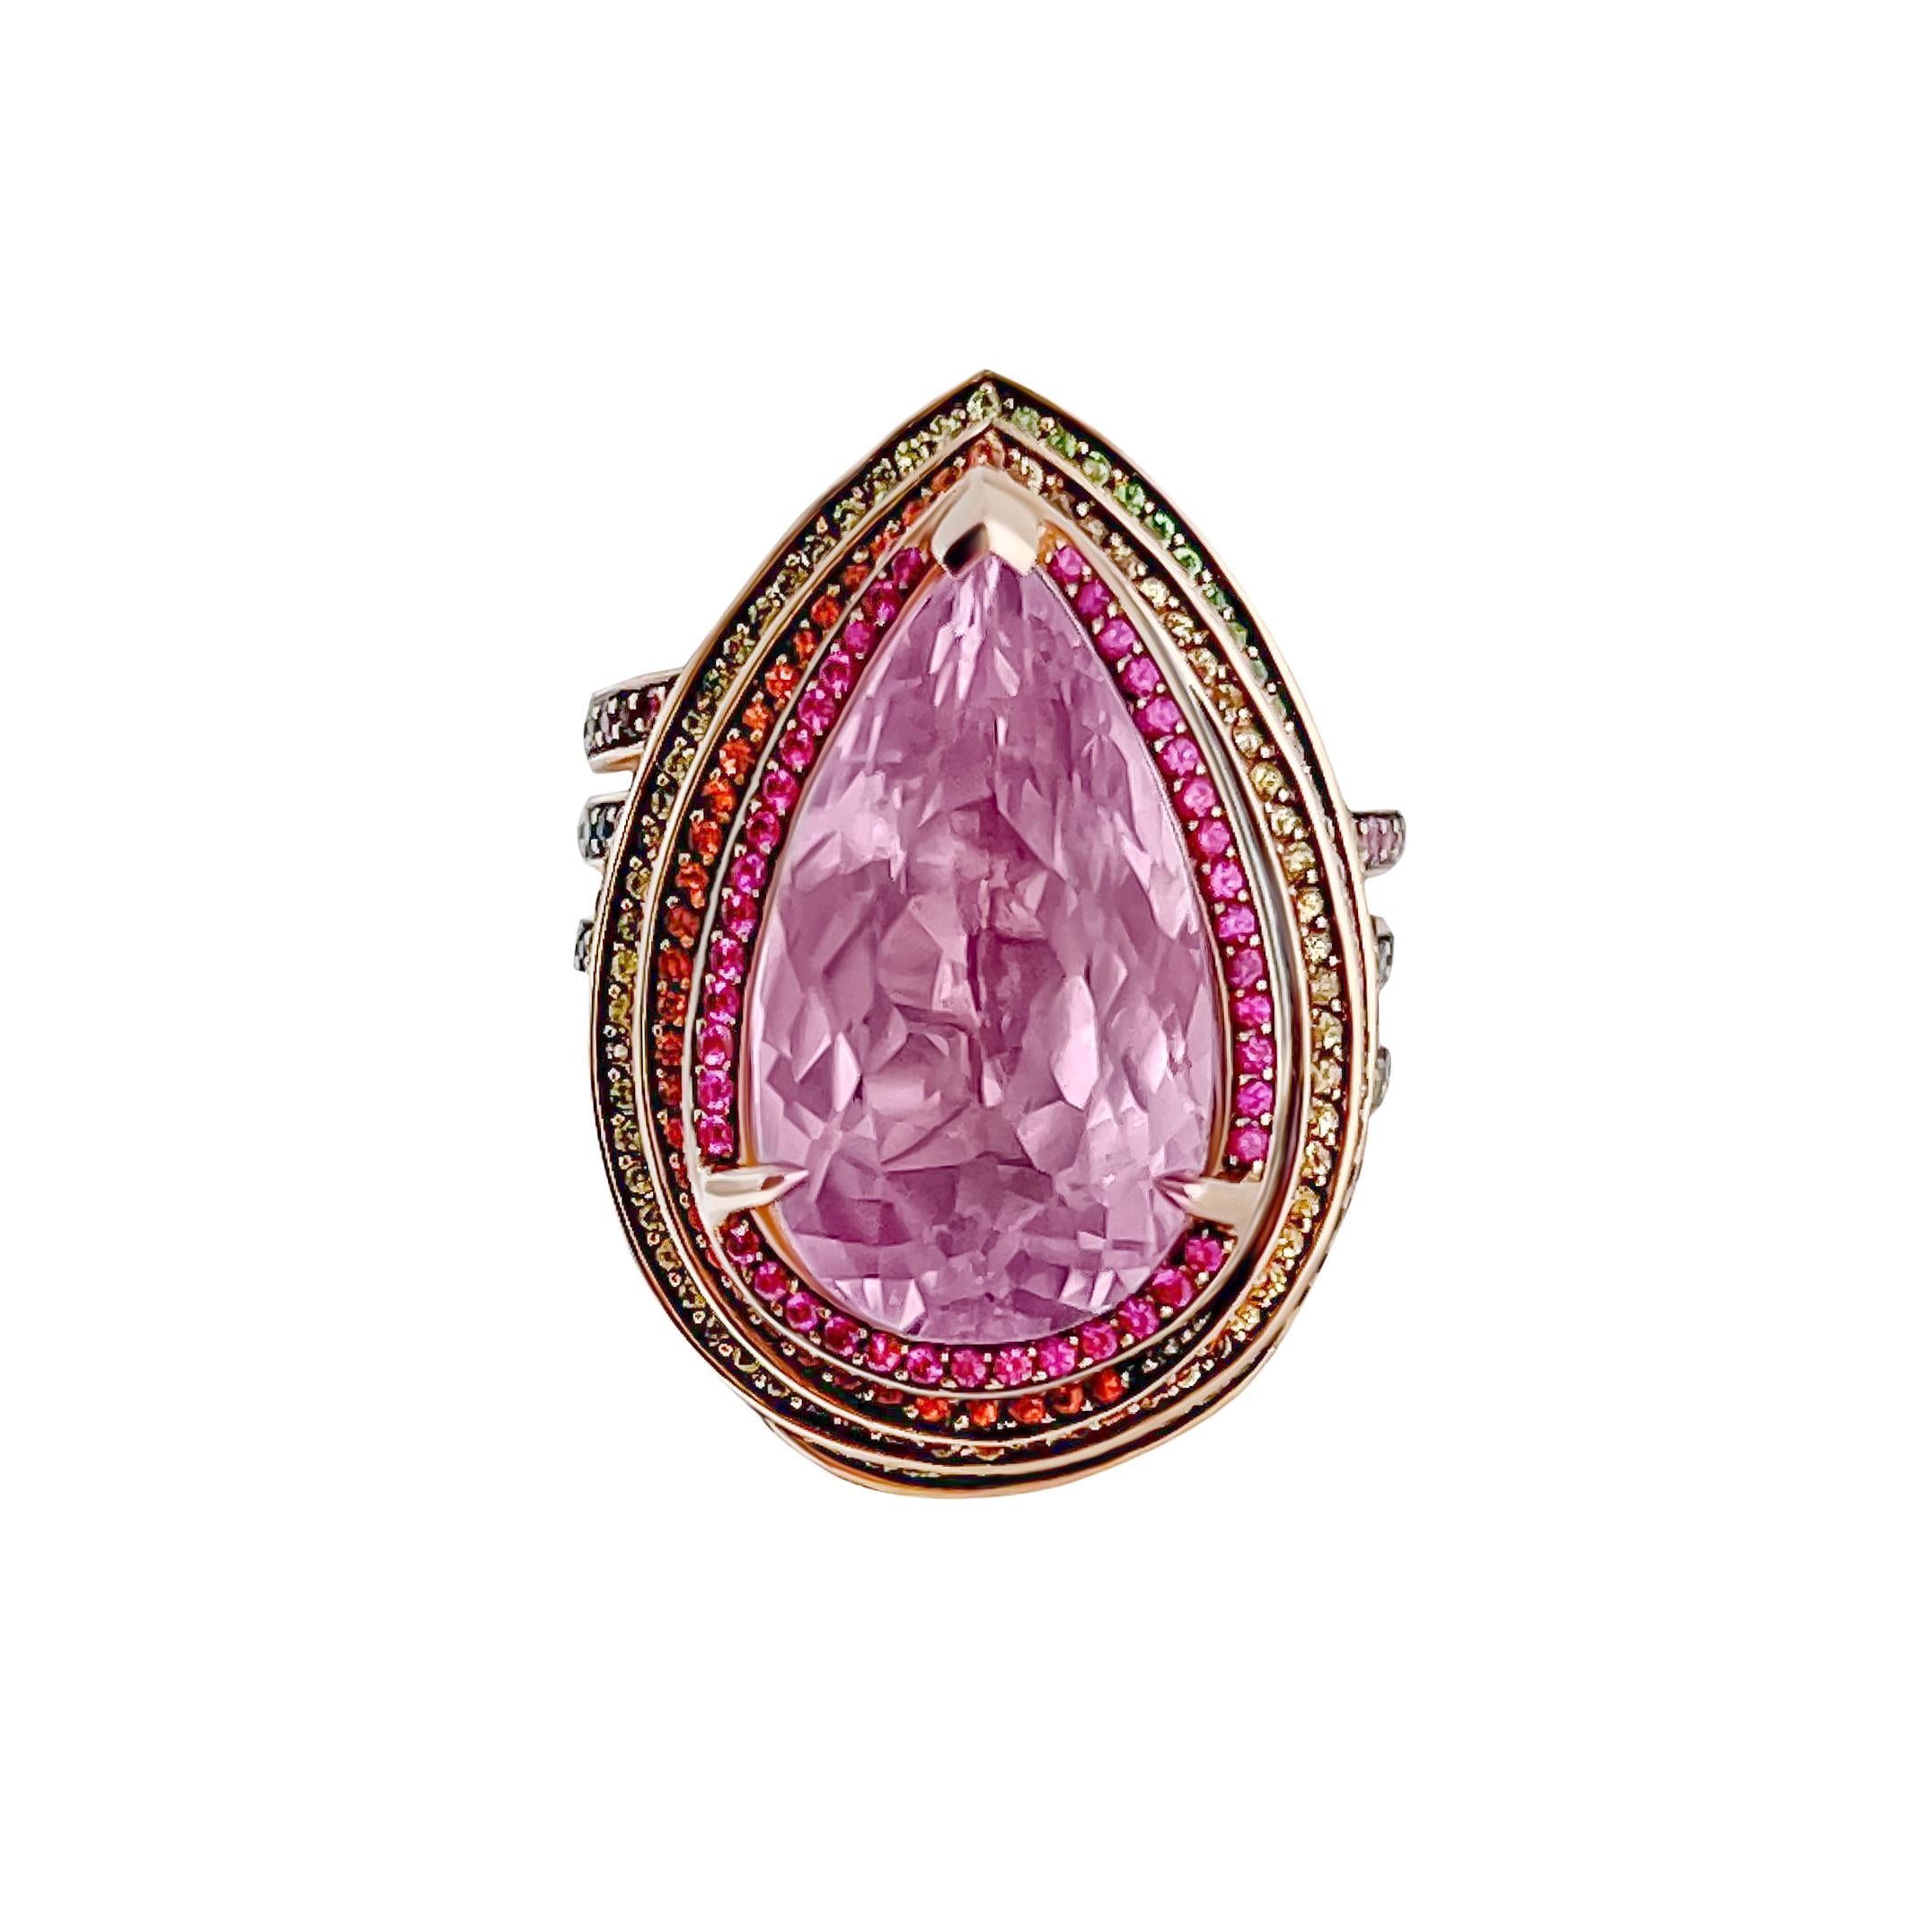 This unique 18k pink gold, kunzite and coloured stone ring is an essential part of a three piece set. Inspired by the rainbow, this ring was exquisitely crafted to create a spiraling movement of gold around the finger and up into the mounting of